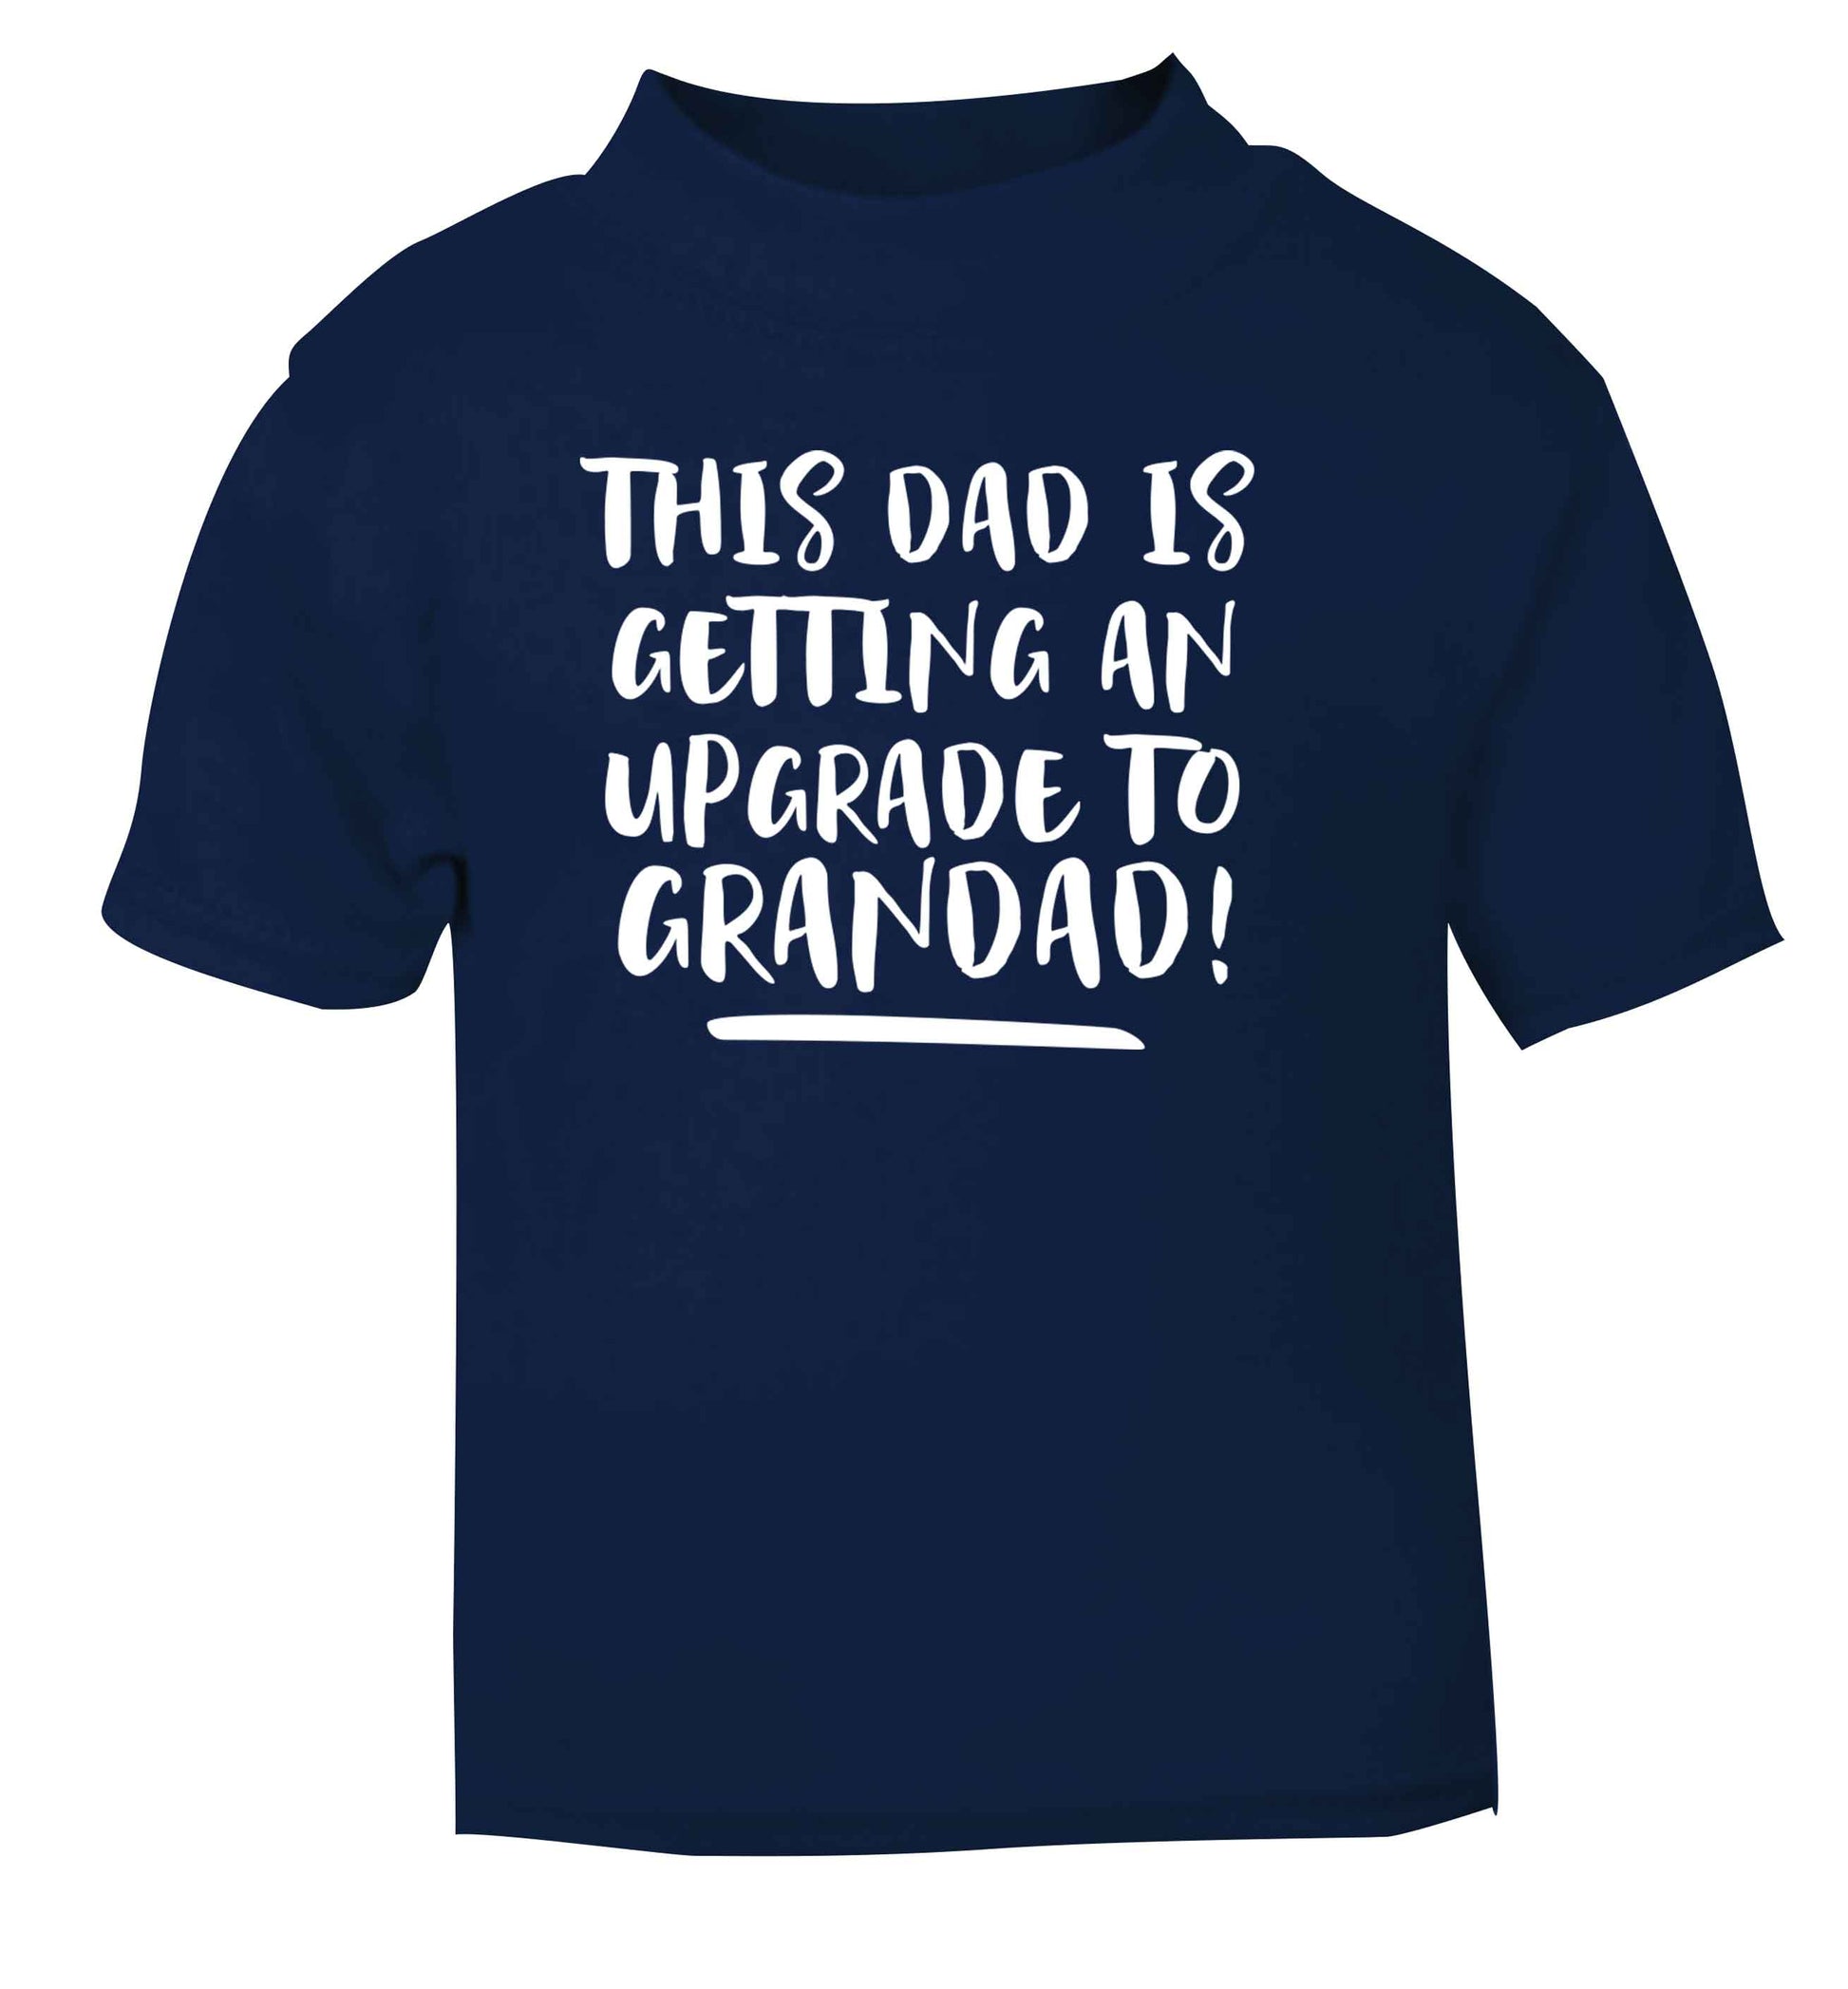 This dad is getting an upgrade to grandad! navy Baby Toddler Tshirt 2 Years